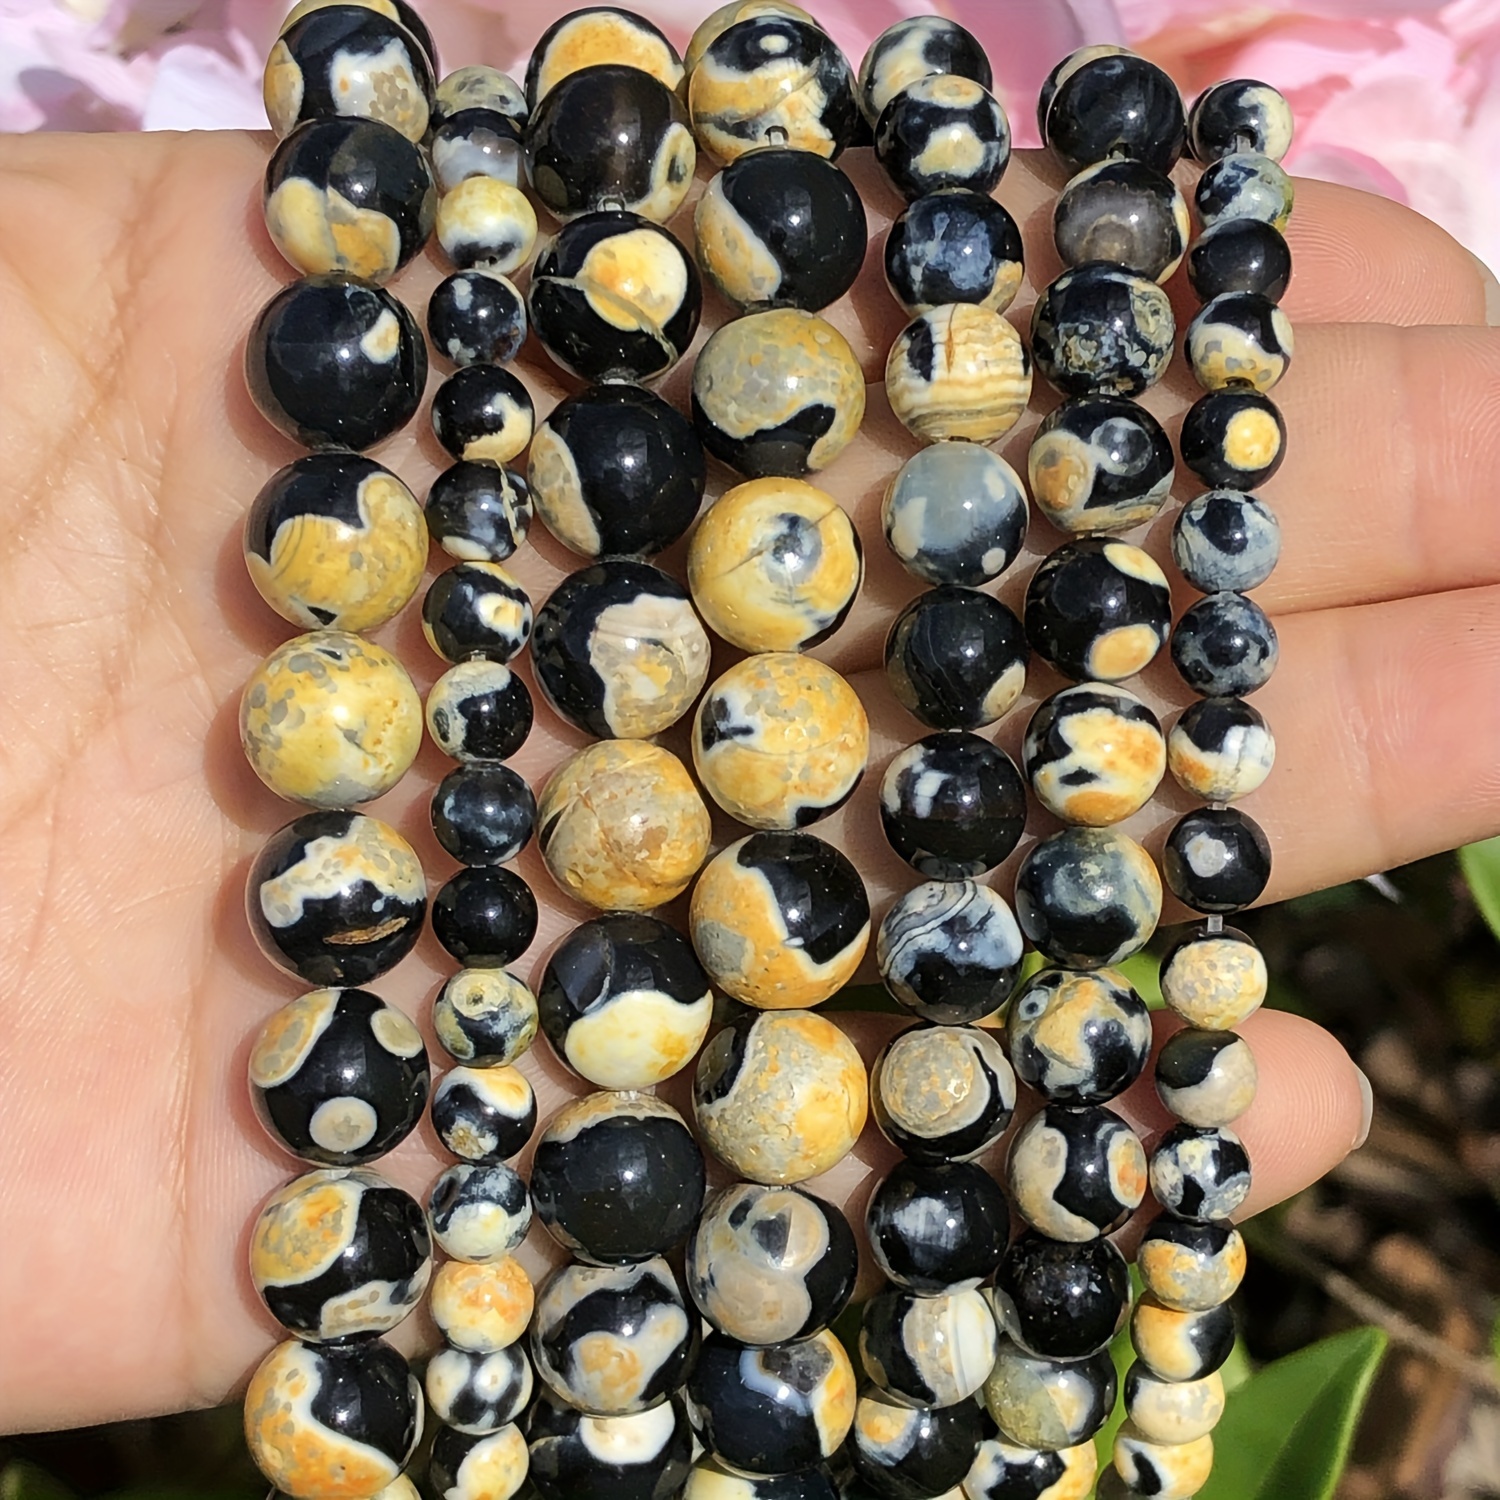 

6/8/10mm Natural Stone Yellow Dream Fire Dragon Veins Black Round Loose Beads Diy Handmade Unique Special Bracelet Necklace Jewelry Making Craft Supplies